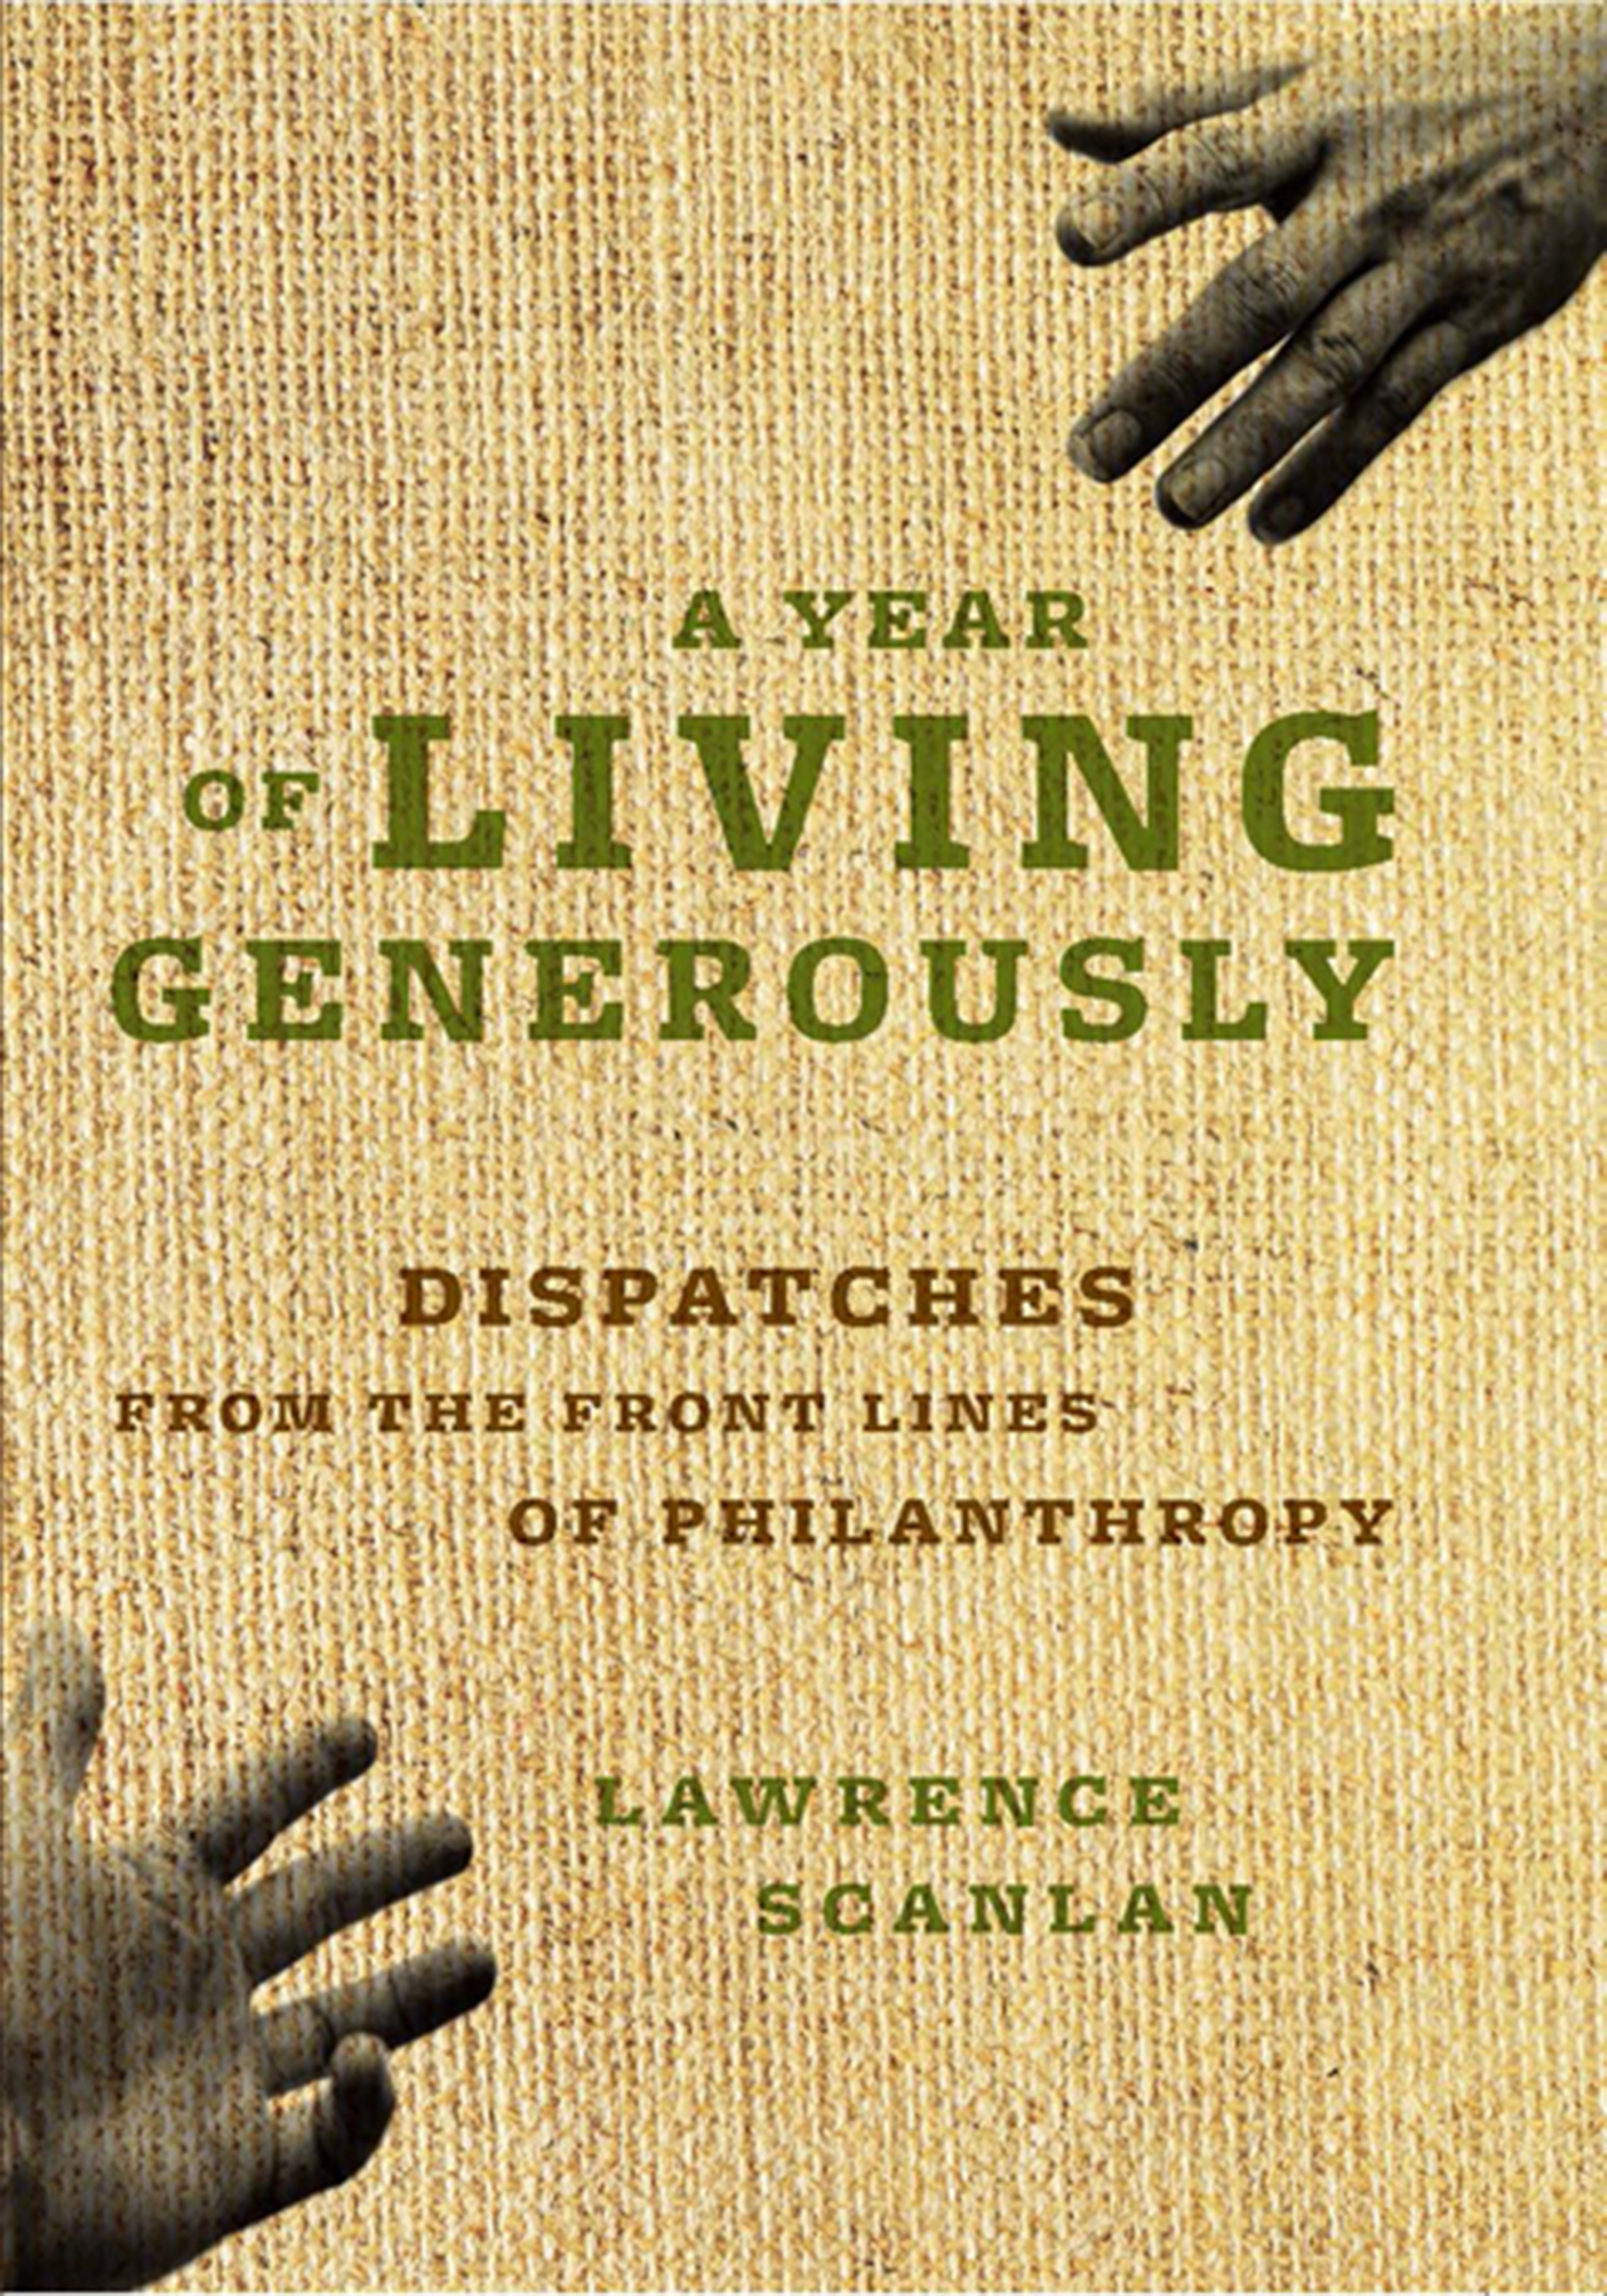 Cover Image of A Year of Living Generously